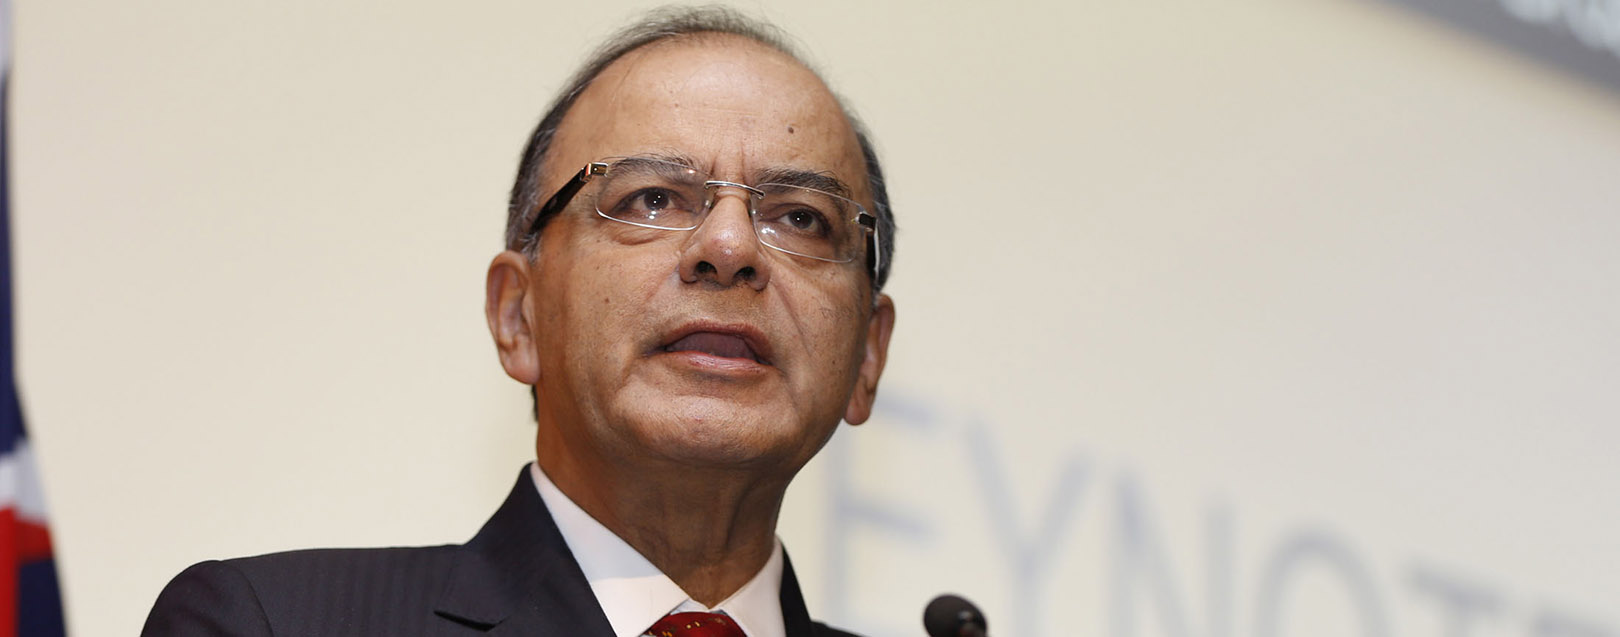 FM sees FY16 GDP growth at 7.6%